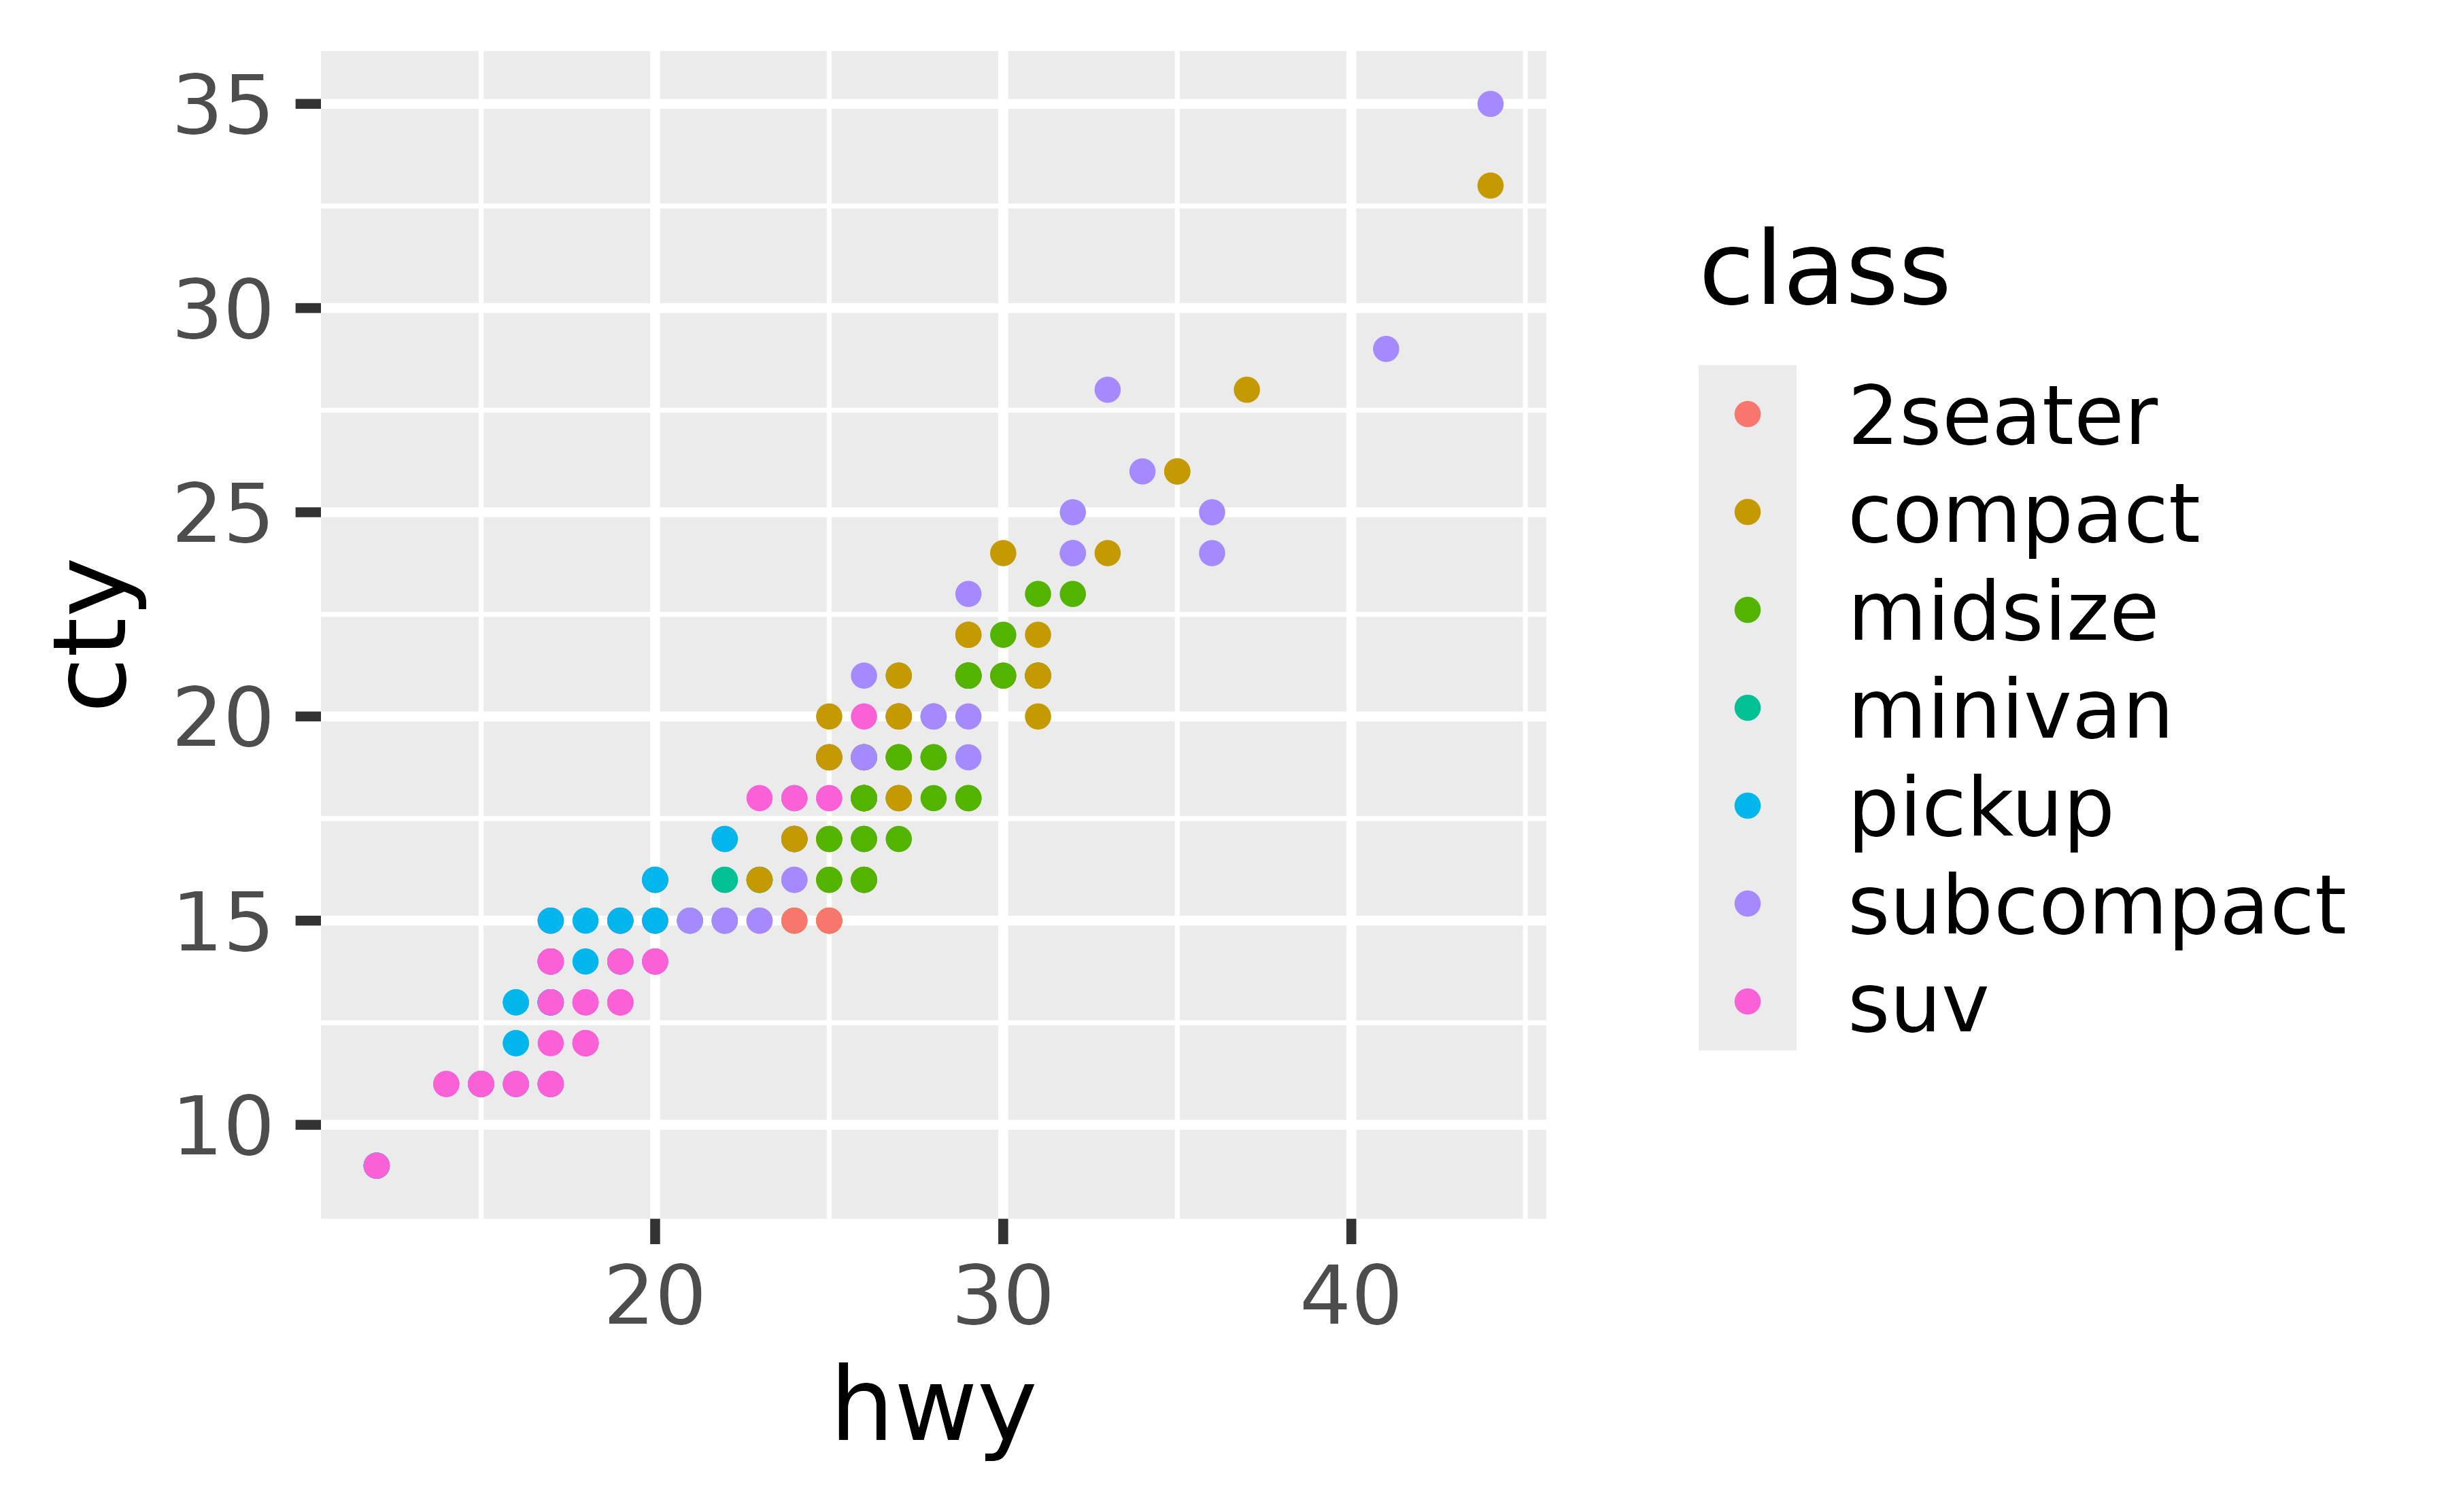 A scatter plot showing the highway miles per gallon on the x-axis and city miles per gallon on the y-axis. The points are coloured by seven types of car. All text sizes in the axes and legend are large.